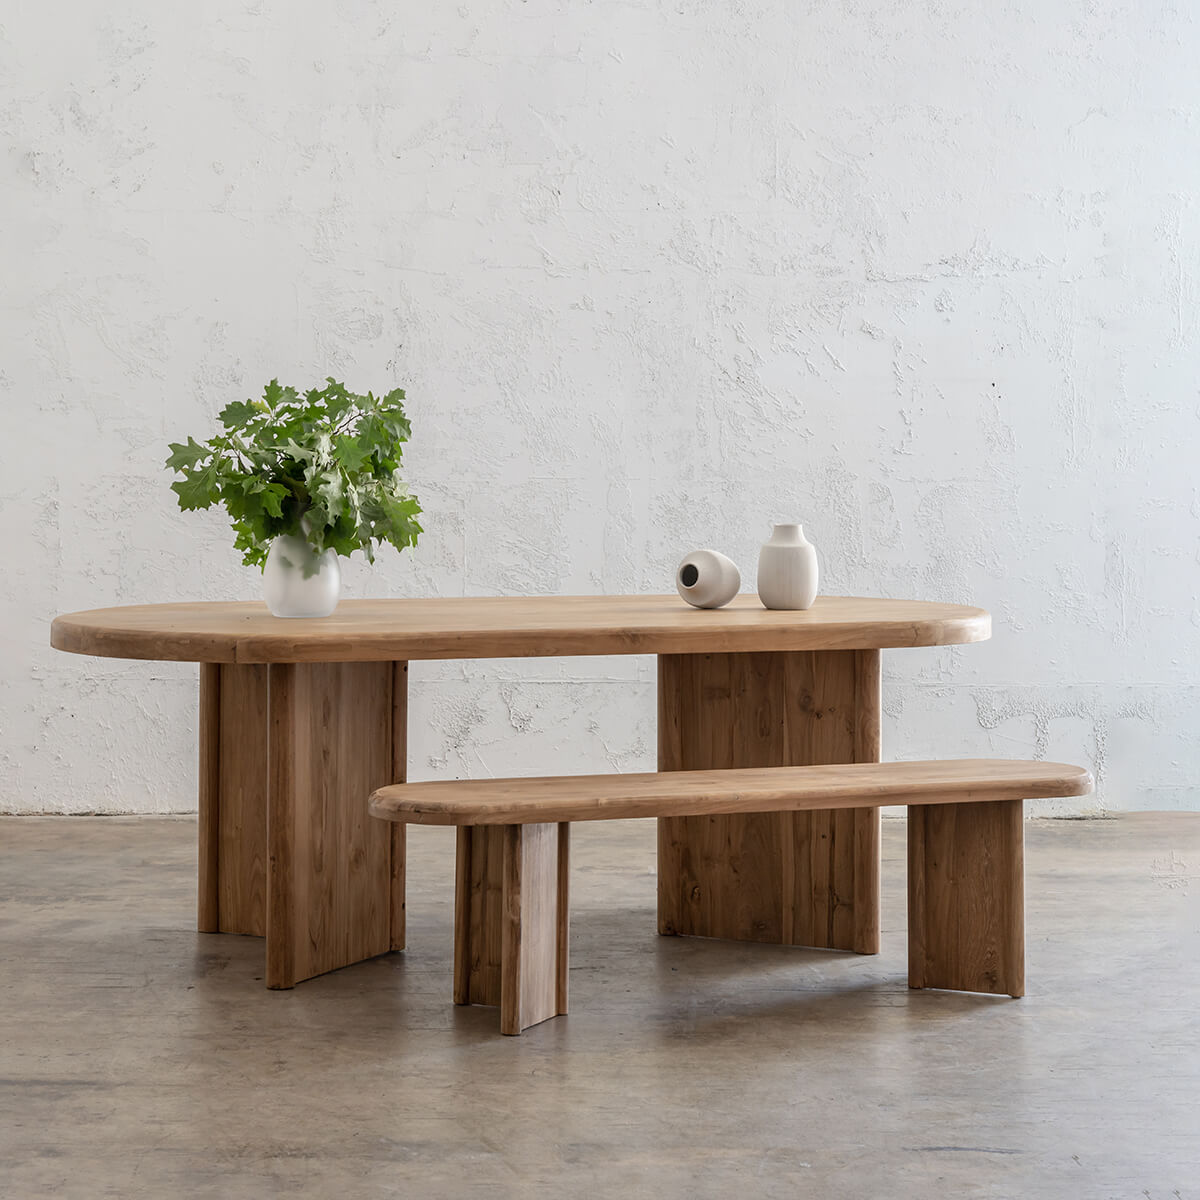 Indoor Teak Dining Table And Chairs